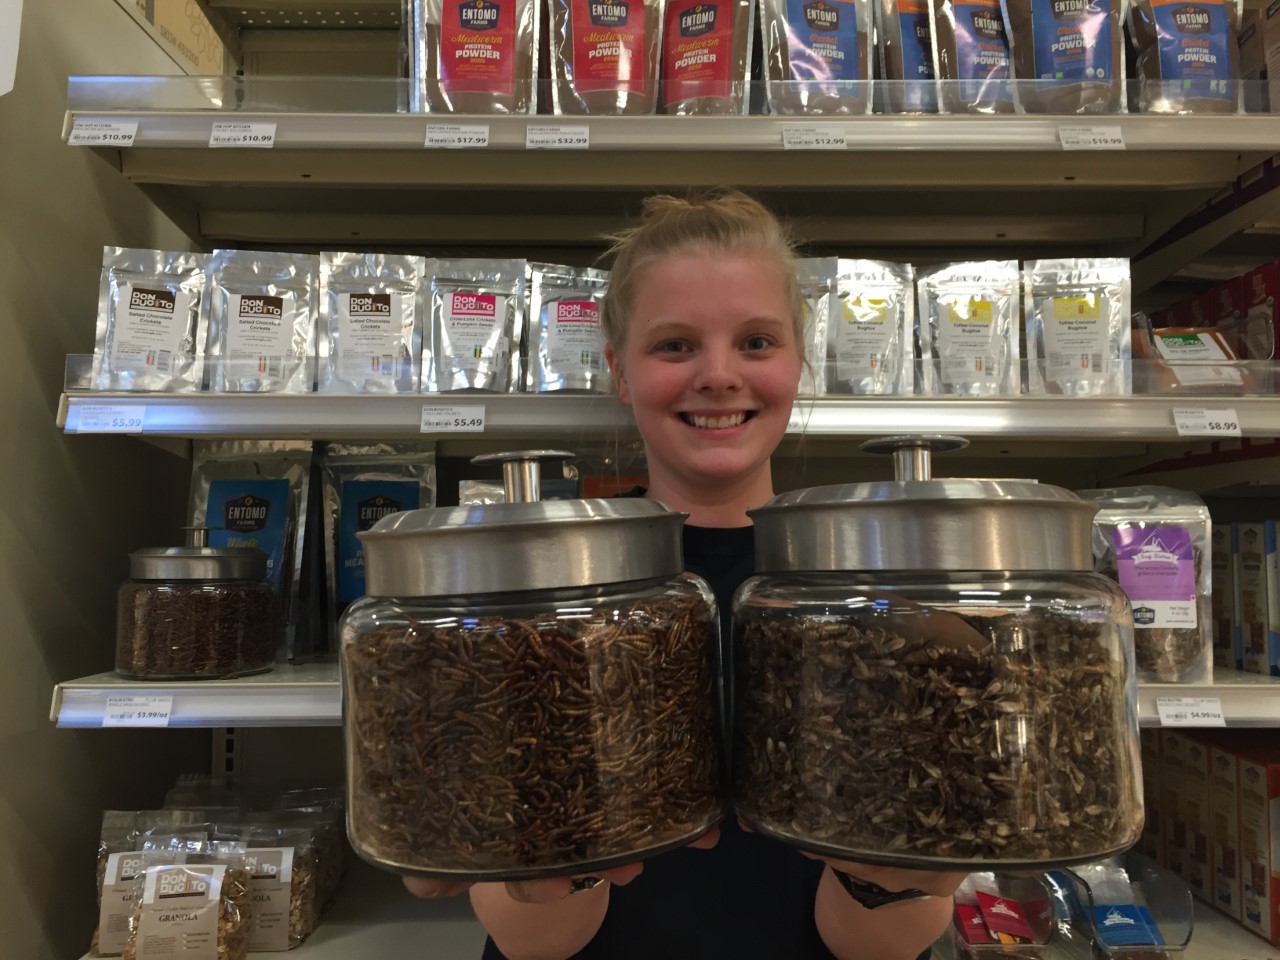 Weigel shows off the new MOM's Cherry Hill store's bulk mealworms and crickets for sale. (Credit: Hadas Kuznits)